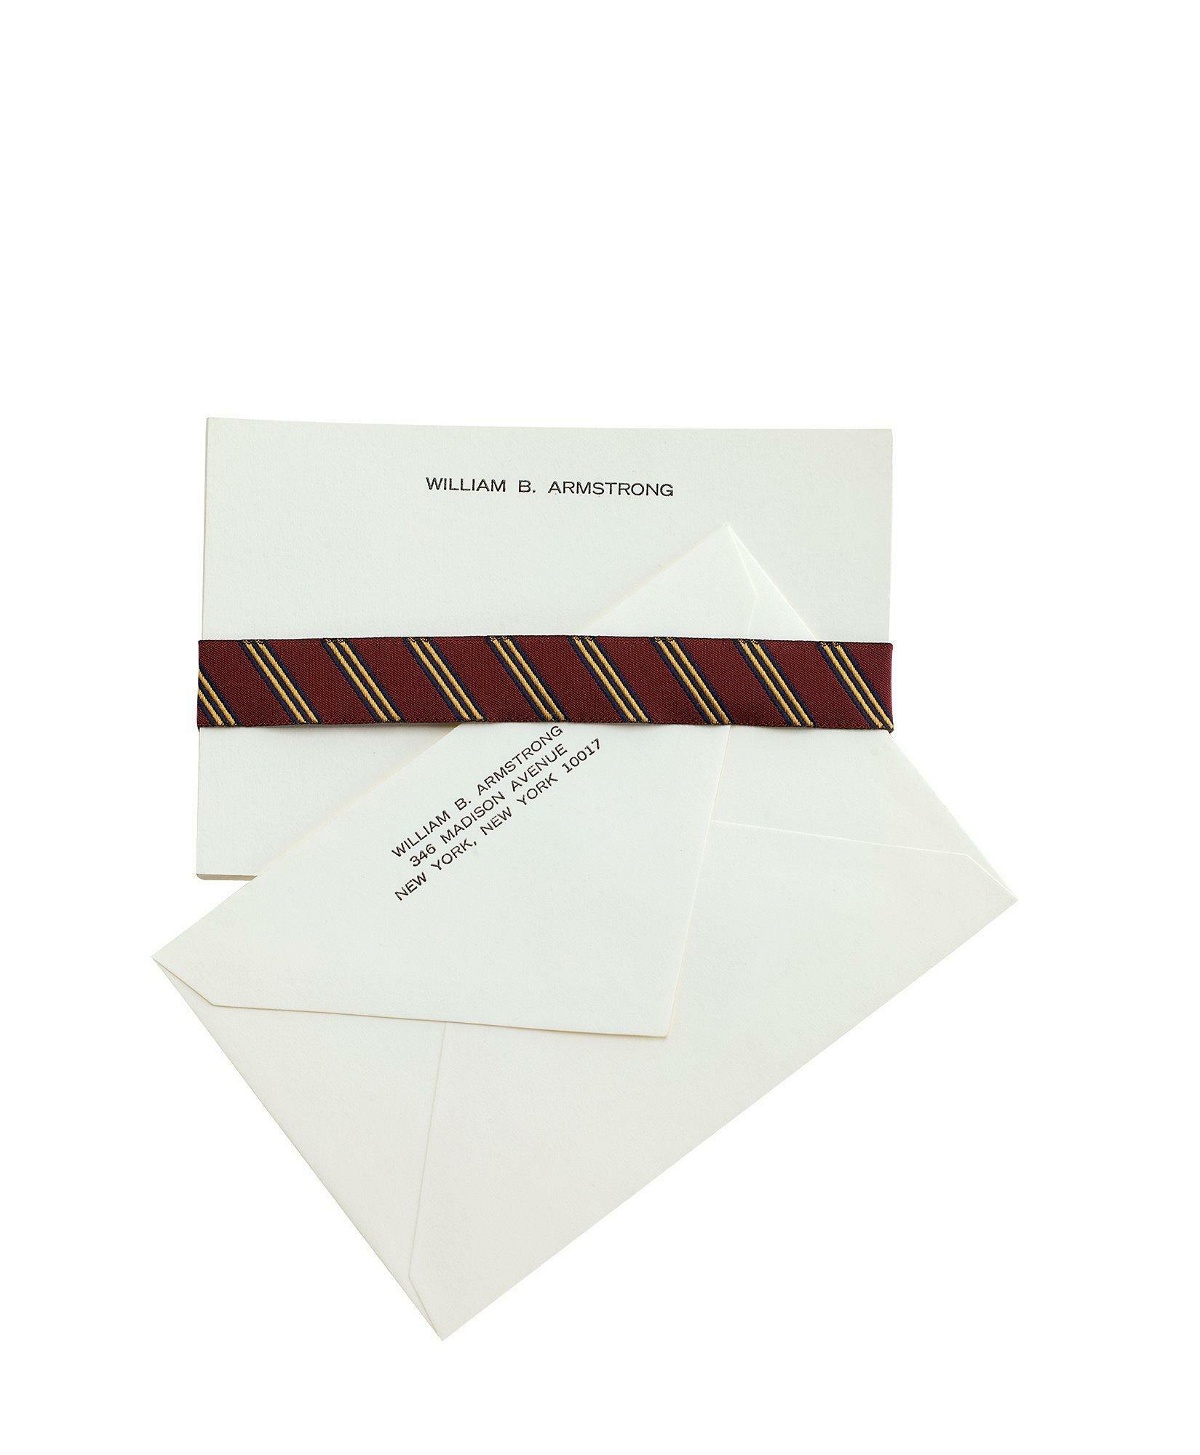 Brooks Brothers Correspondence Cards - 50 Cards & Envelopes Shoes | Ivory